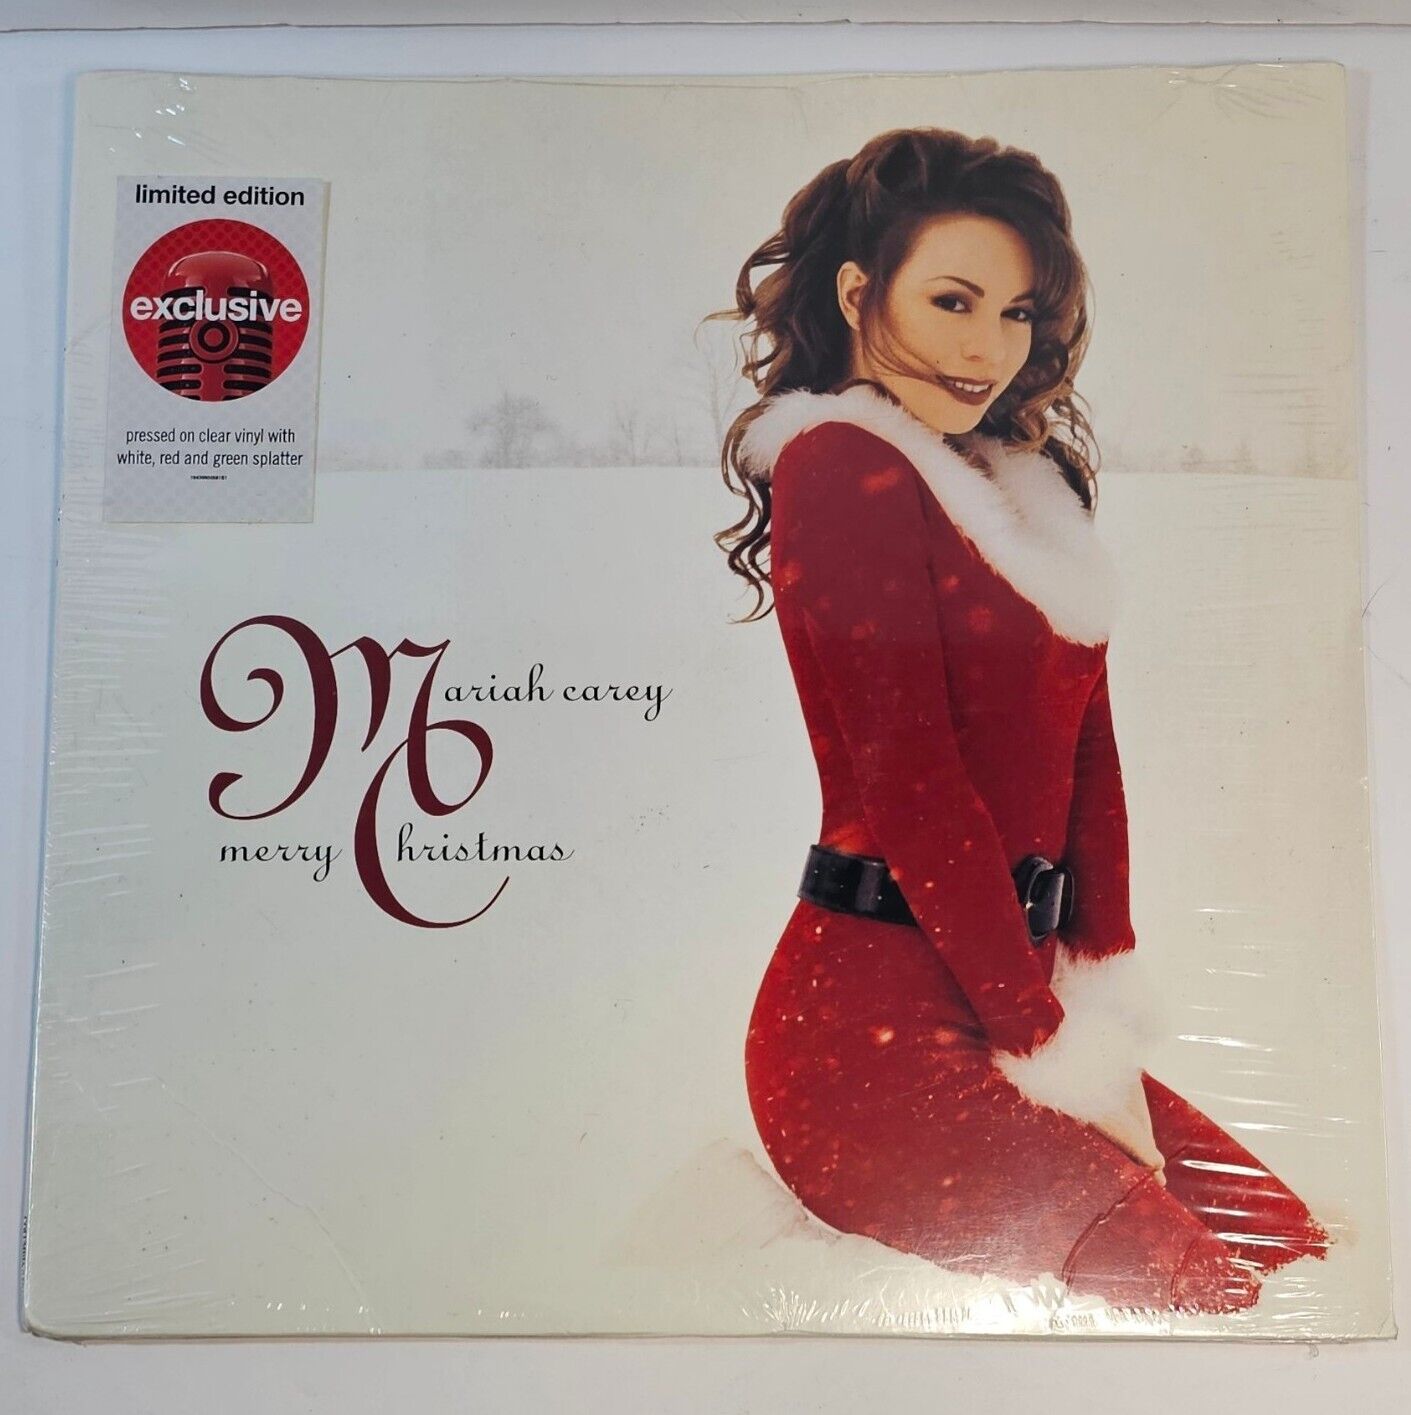 Merry Christmas Limited Edition by Mariah Carey (LP,  2015,Columbia) New Sealed